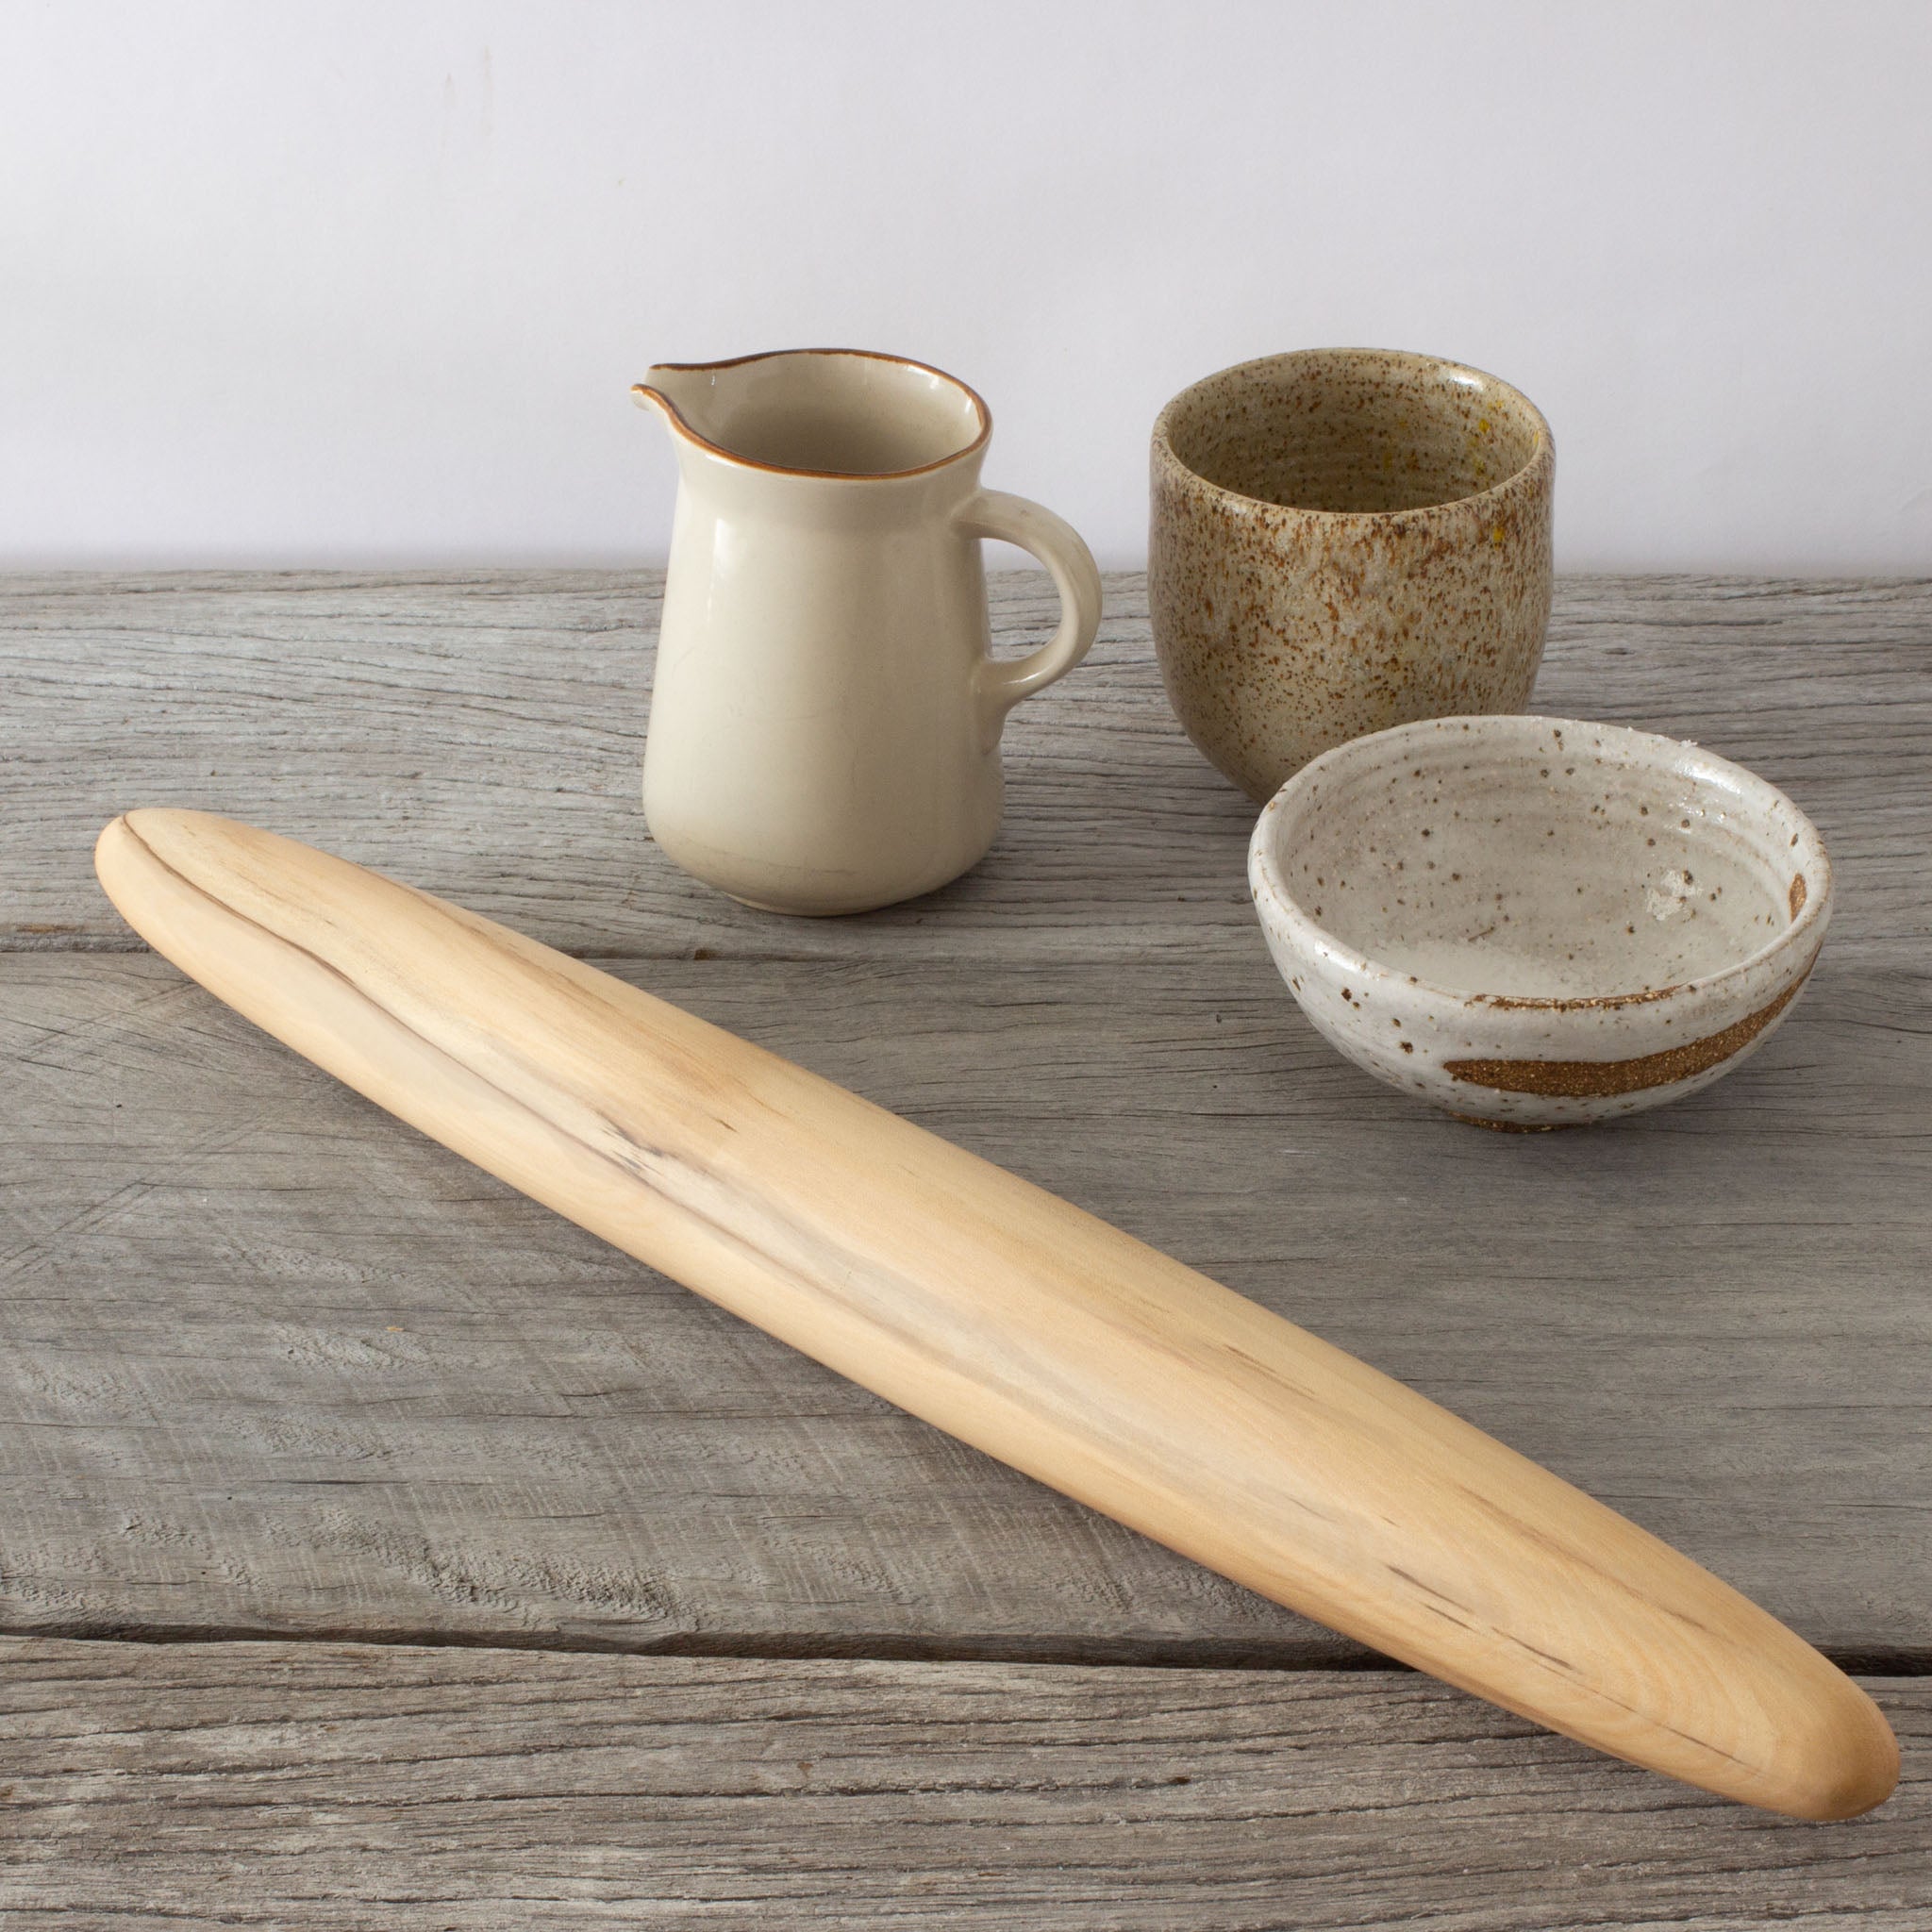 French Style Rolling Pins